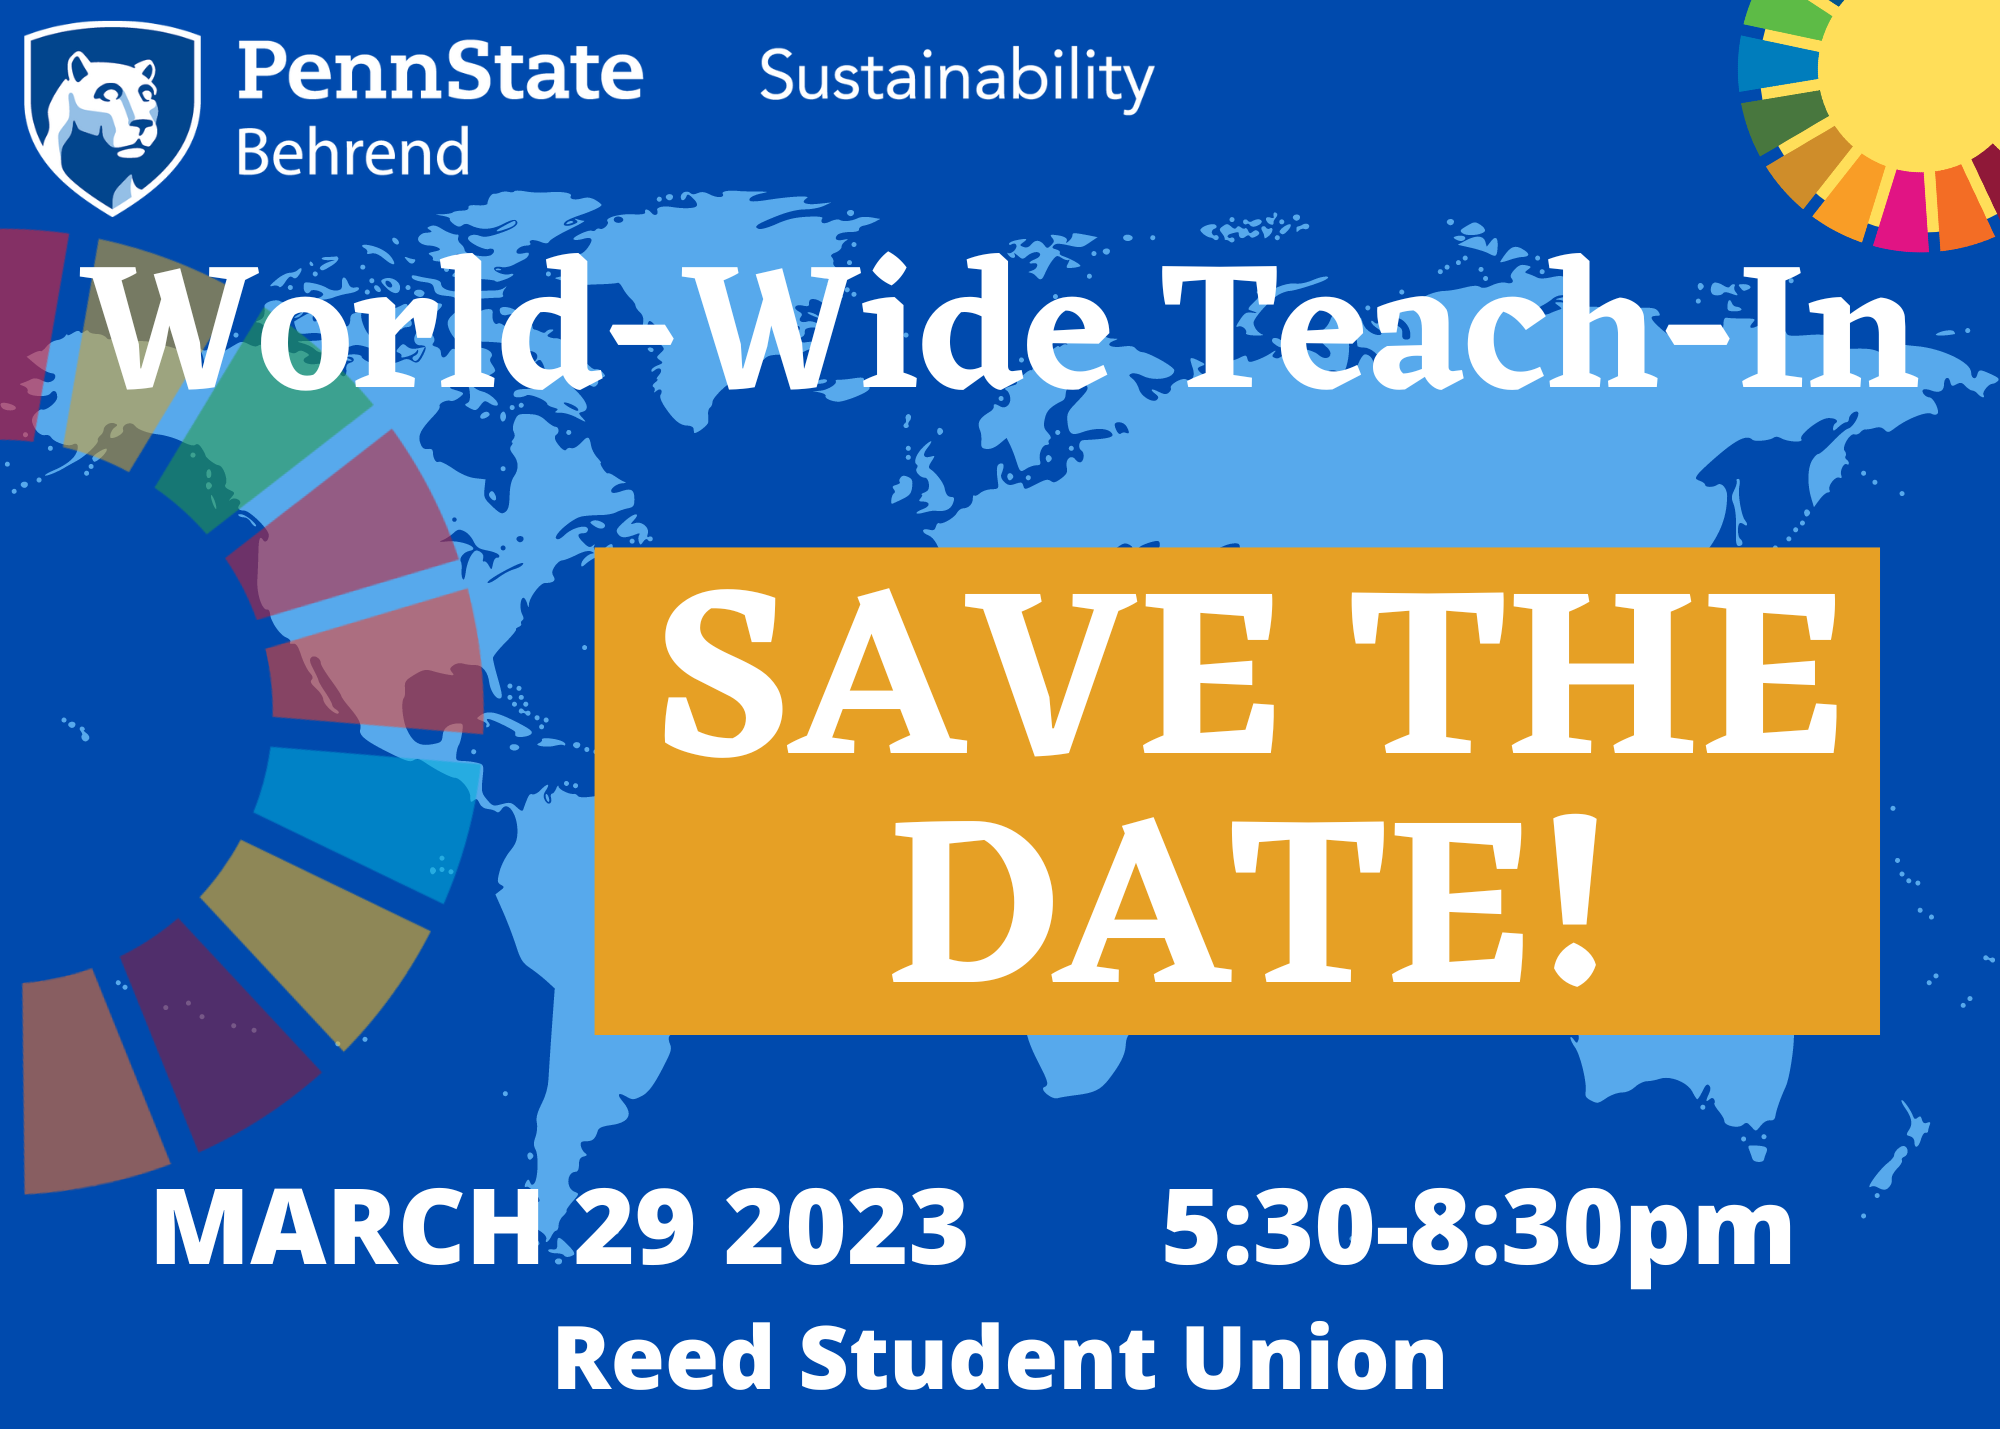 "Save the Date" poster for World-Wide Teach-In